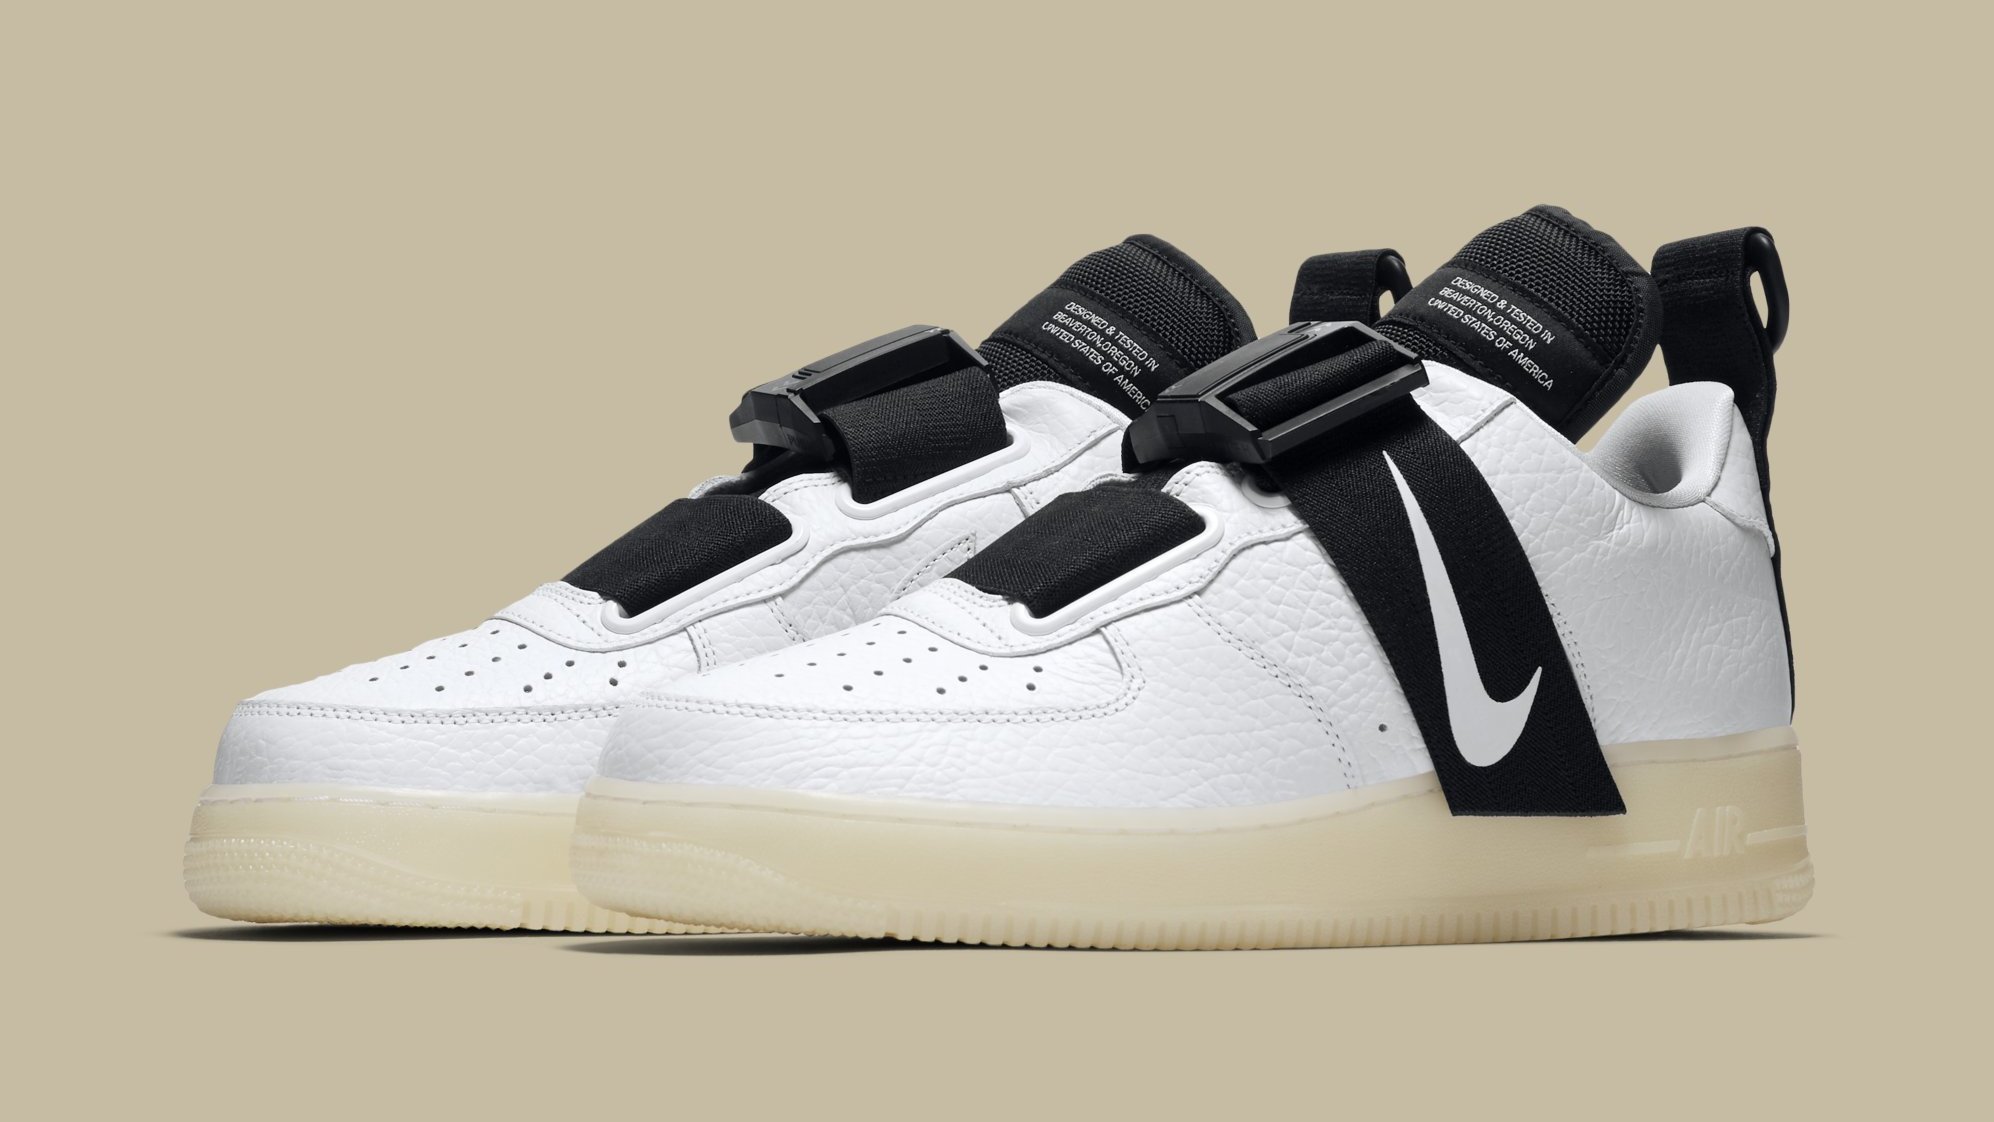 The Nike Air Force 1 Utility Debuts This Week